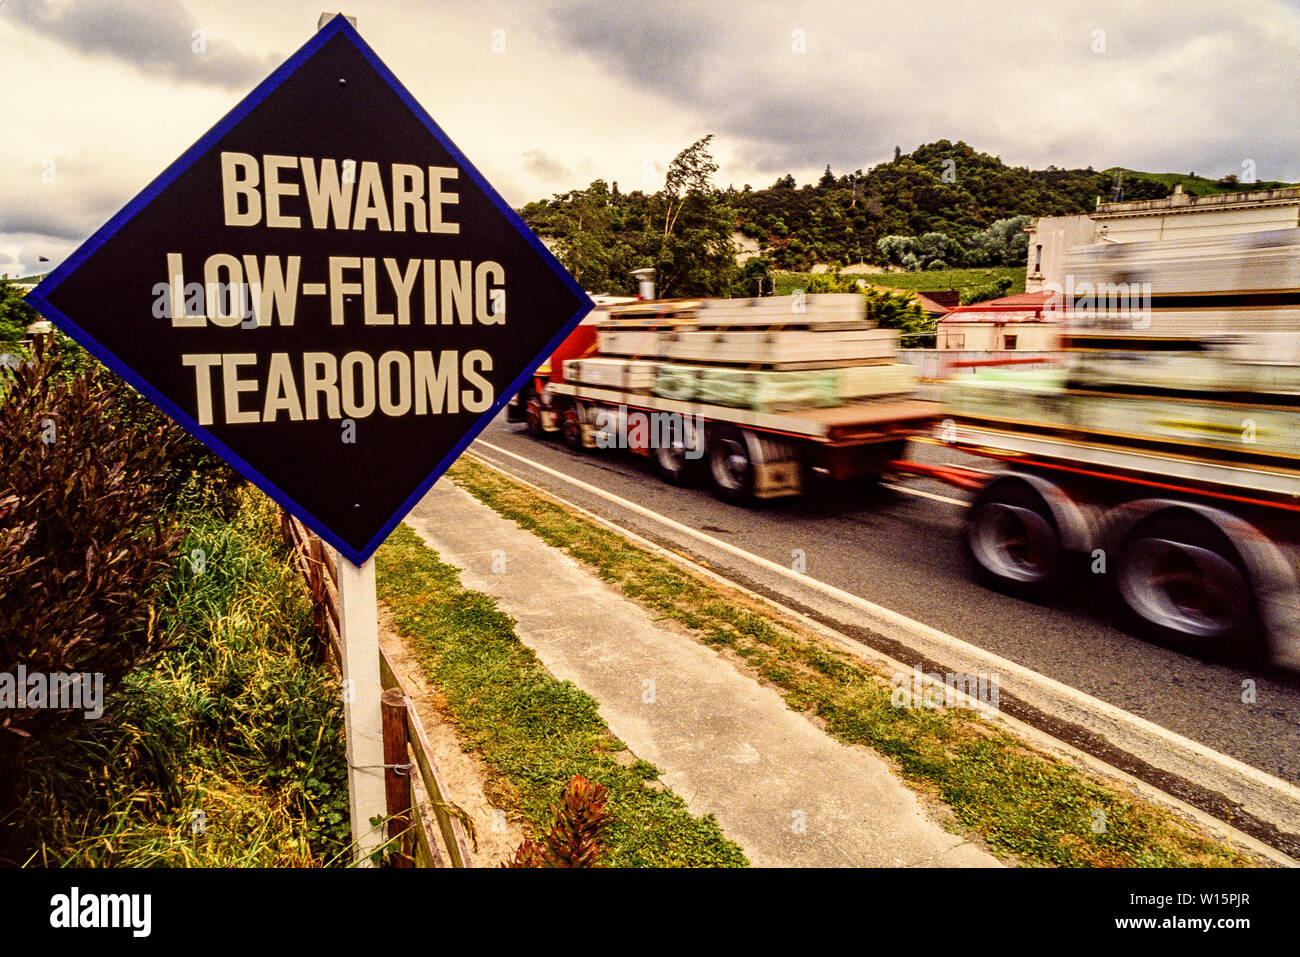 November 1989. North Island, New Zealand. Road sign for the Low Flying Tea Rooms: converted DC-3 aeroplane in Mangaweka, north of Palmerston. Photo ta Stock Photo